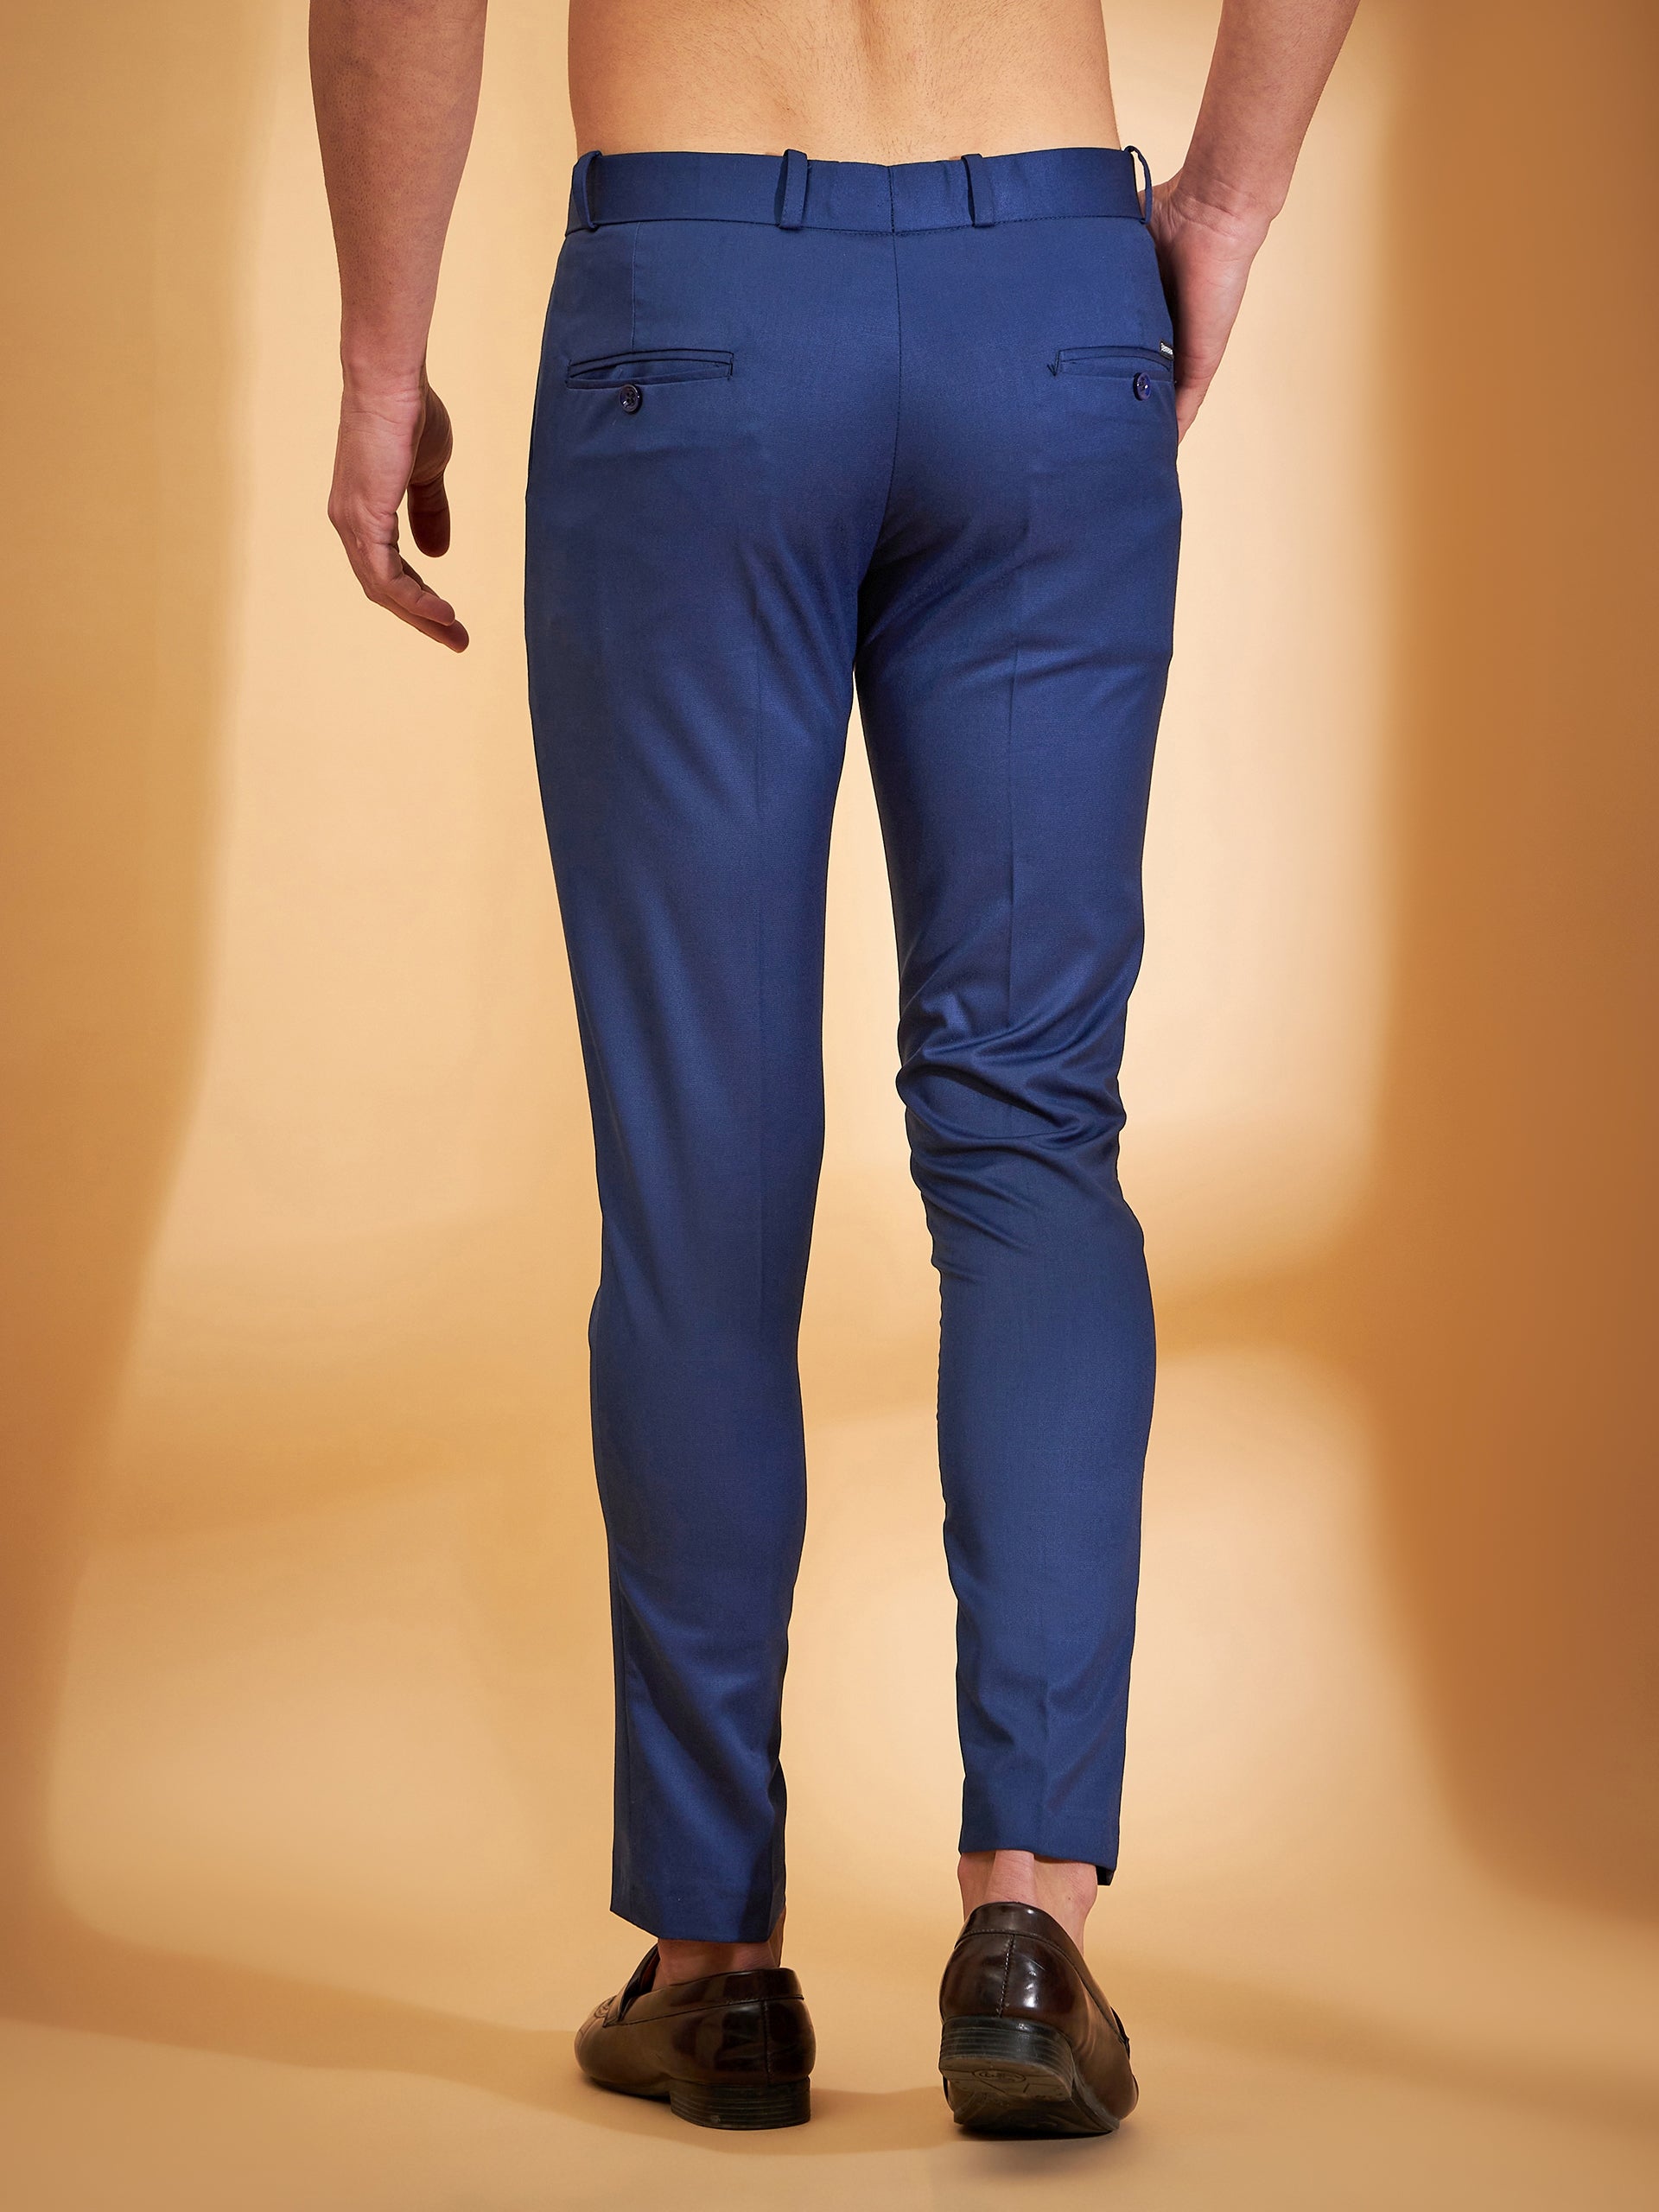 Helly Fashion Slim Fit Men Blue Trousers - Buy Helly Fashion Slim Fit Men Blue  Trousers Online at Best Prices in India | Flipkart.com